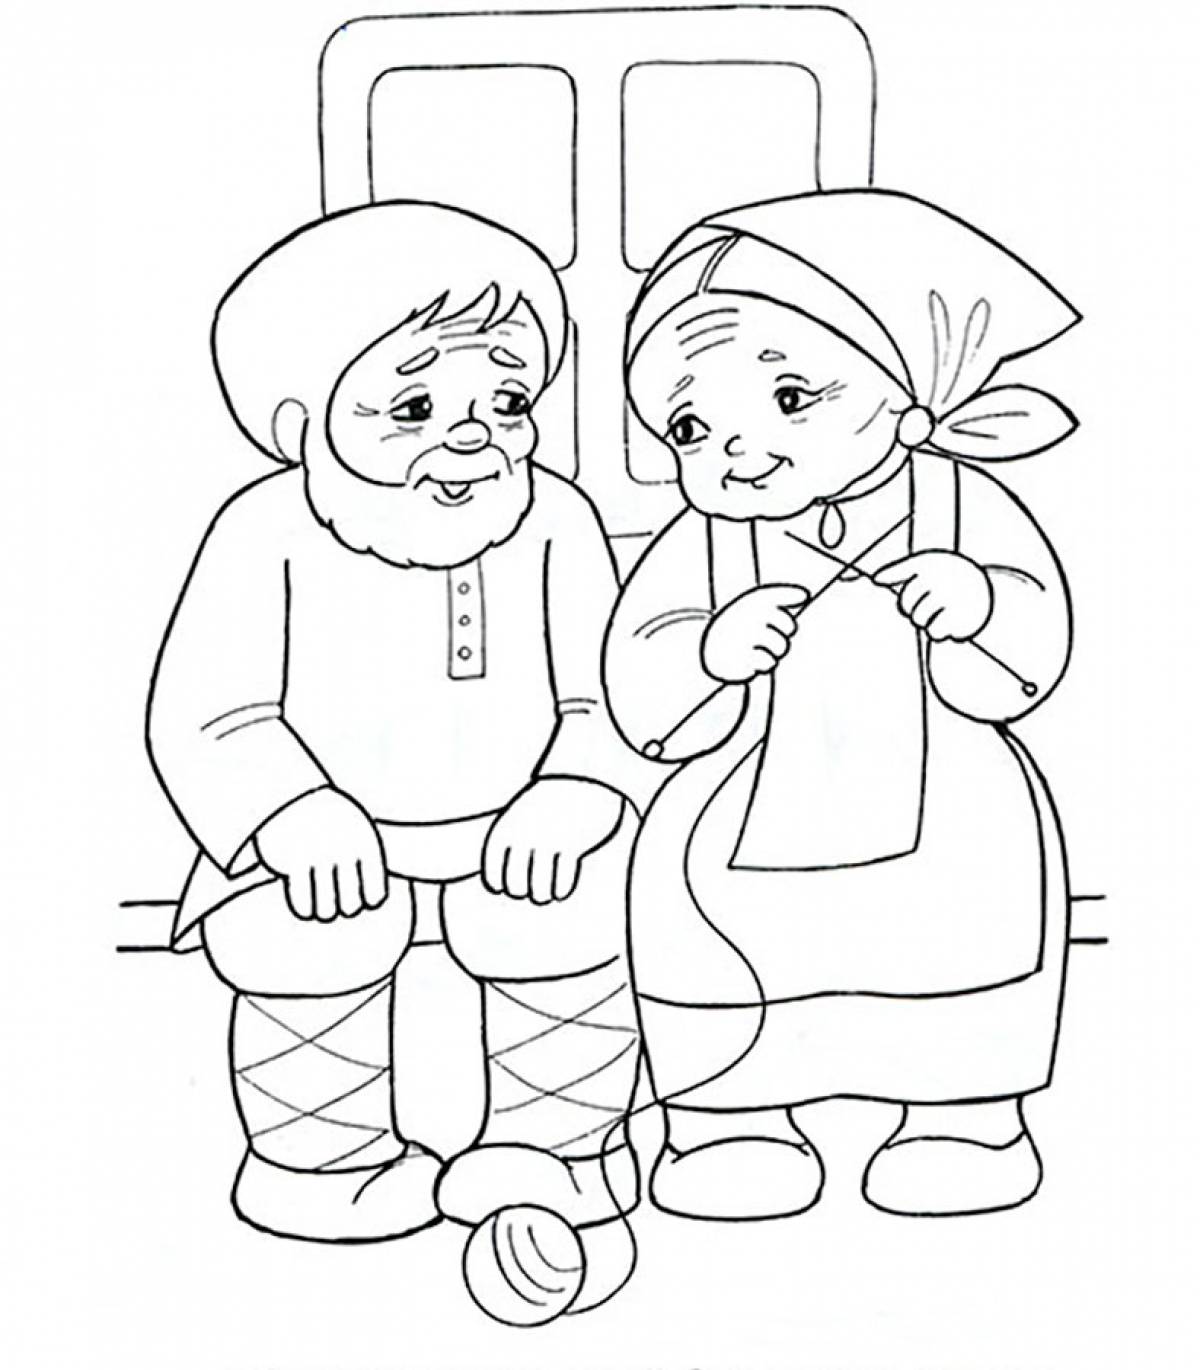 Grandfather coloring pages